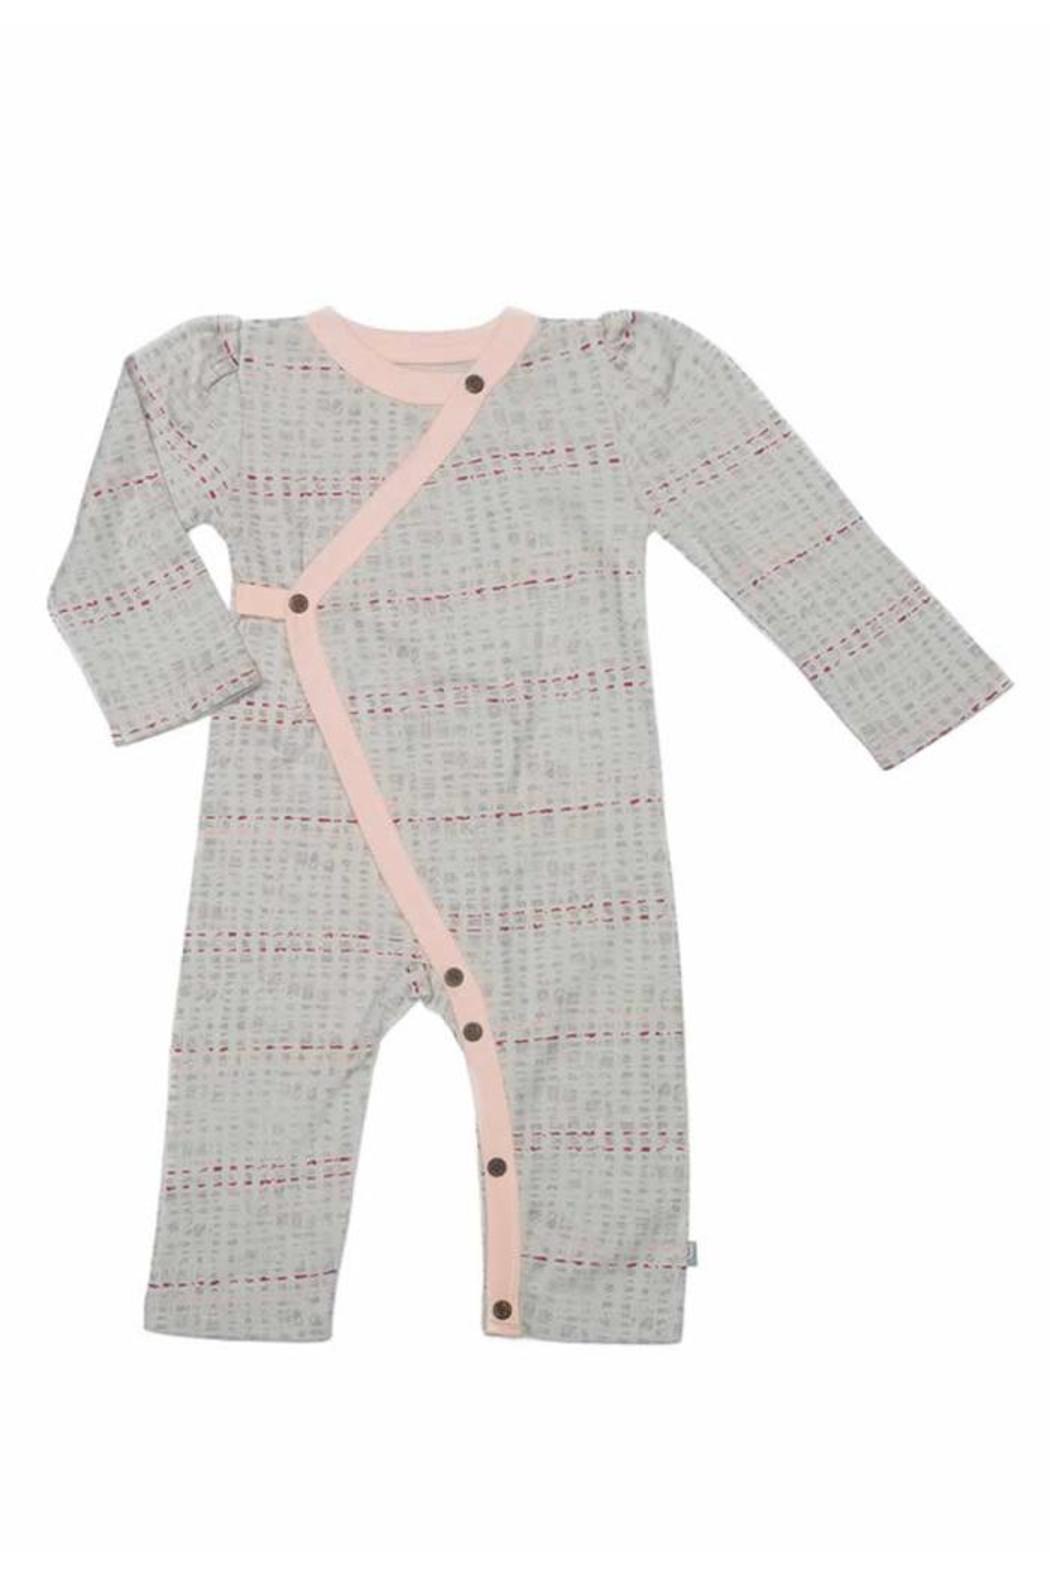 Finn+Emma Scribble Print Coverall - Crunch Natural Parenting is where to buy